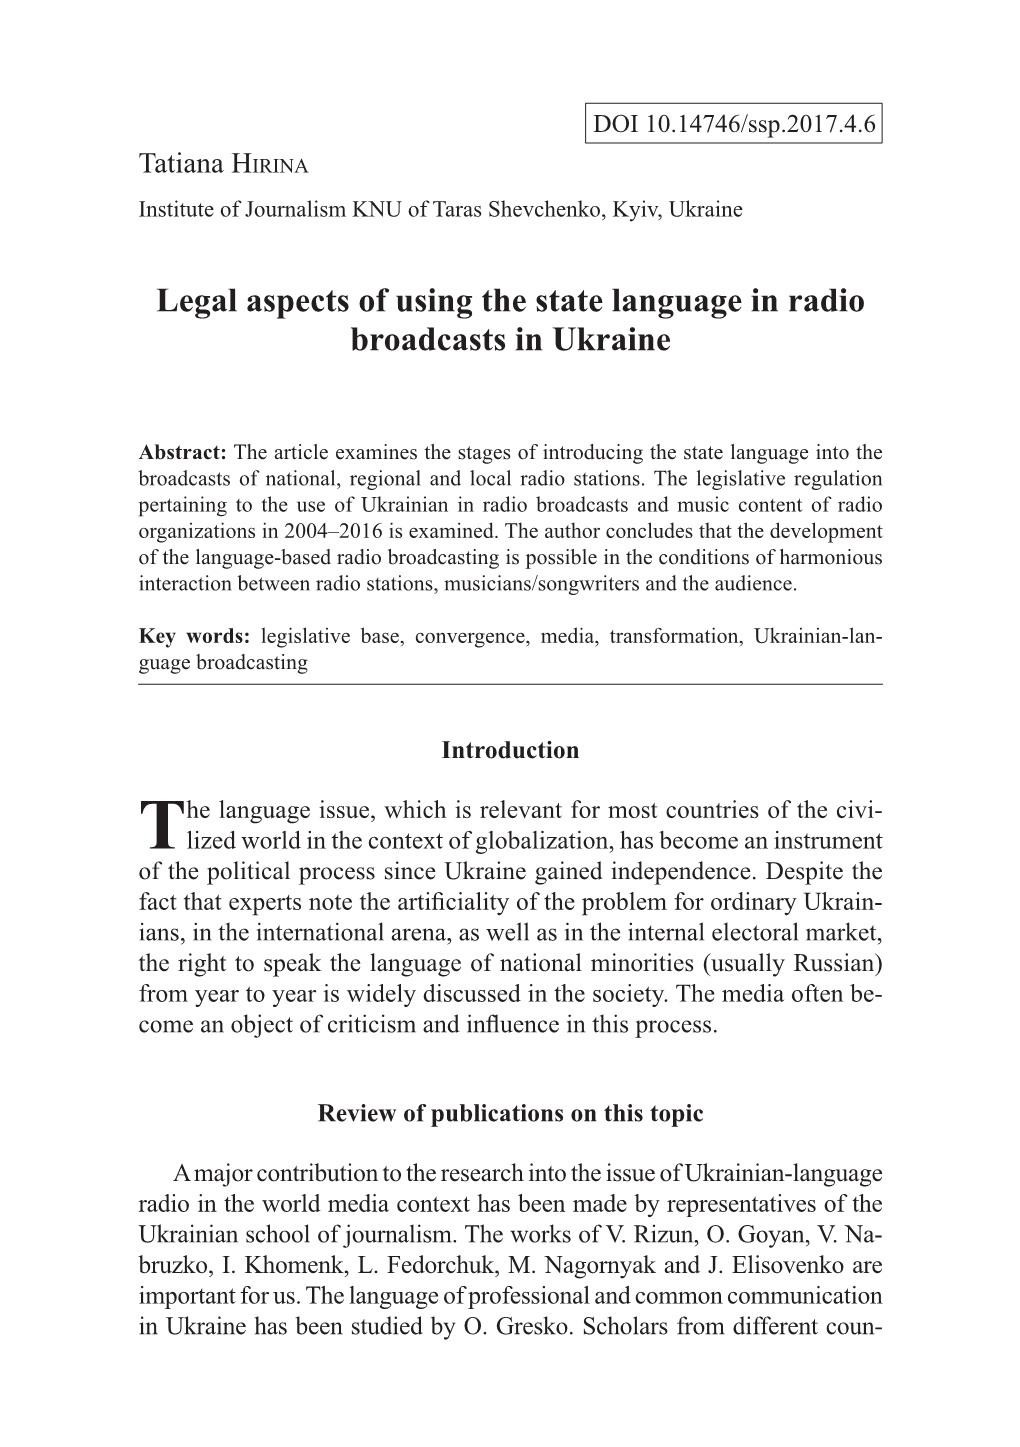 Legal Aspects of Using the State Language in Radio Broadcasts in Ukraine